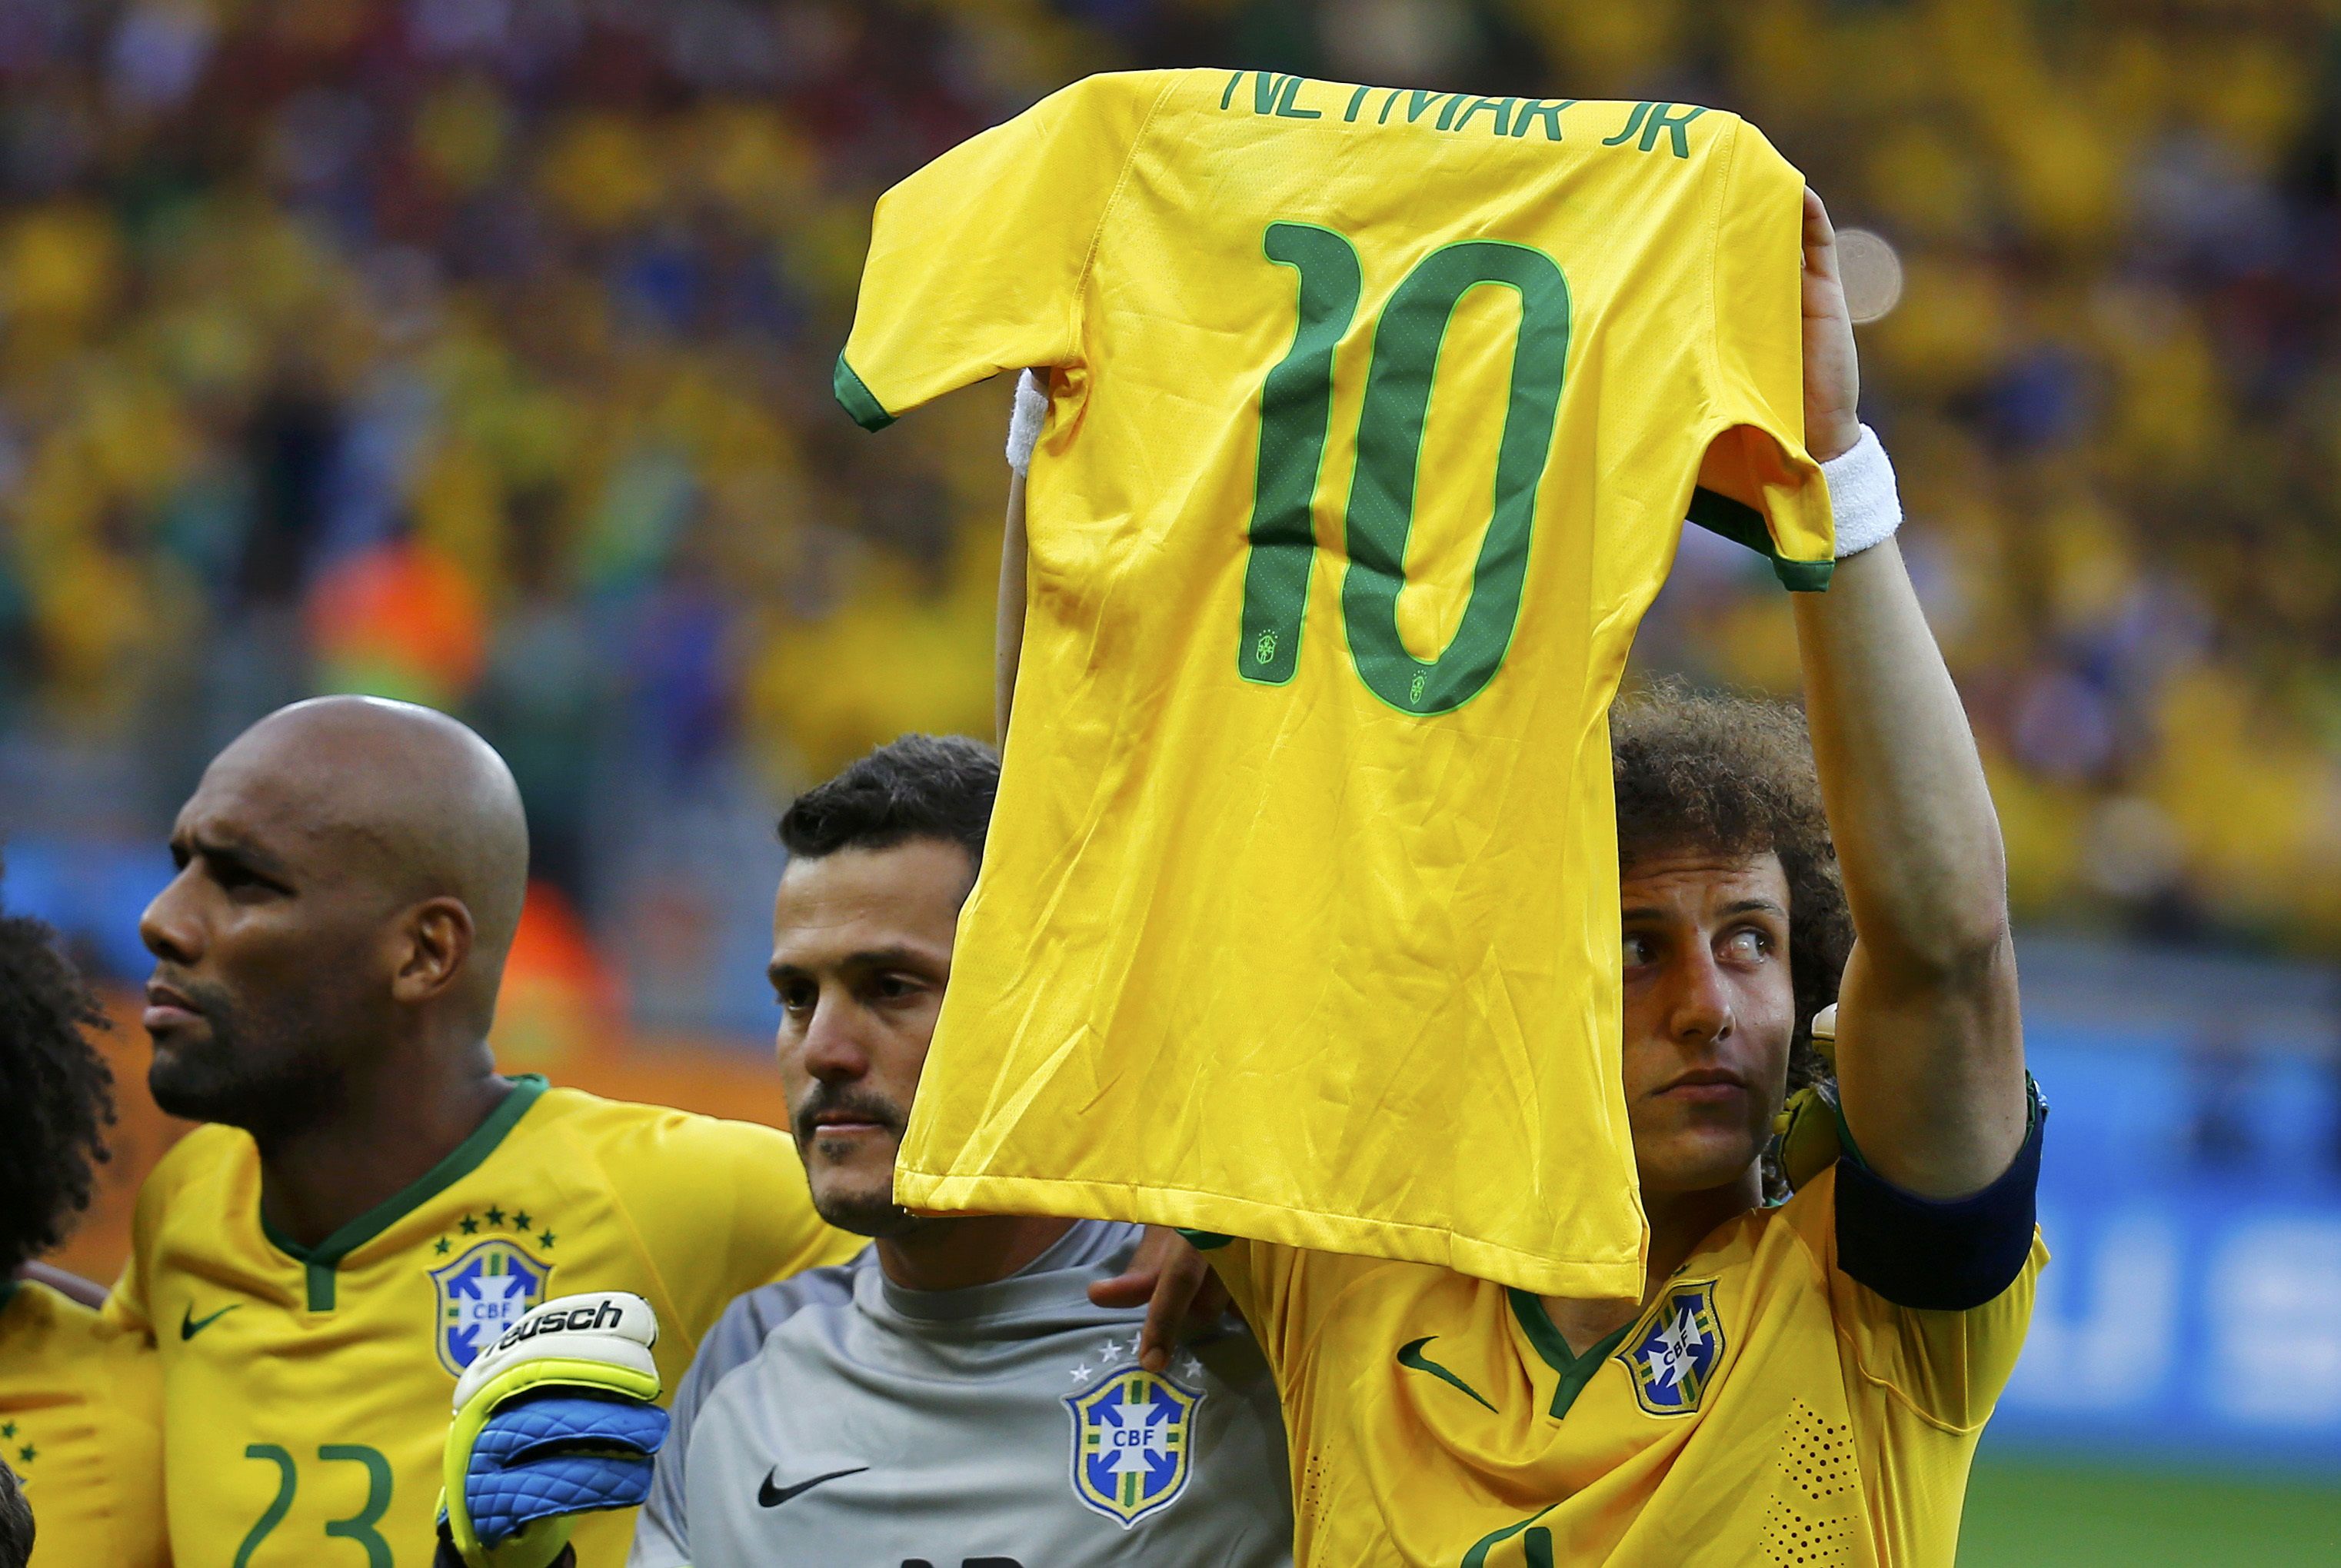 Brazil's David Luiz holds up the jersey of his teammate Neymar during the singing of national anthems before their 2014 World Cup semi-finals against Germany at the Mineirao stadium in Belo Horizonte July 8, 2014. REUTERS/Kai Pfaffenbach (BRAZIL  - Tags: 